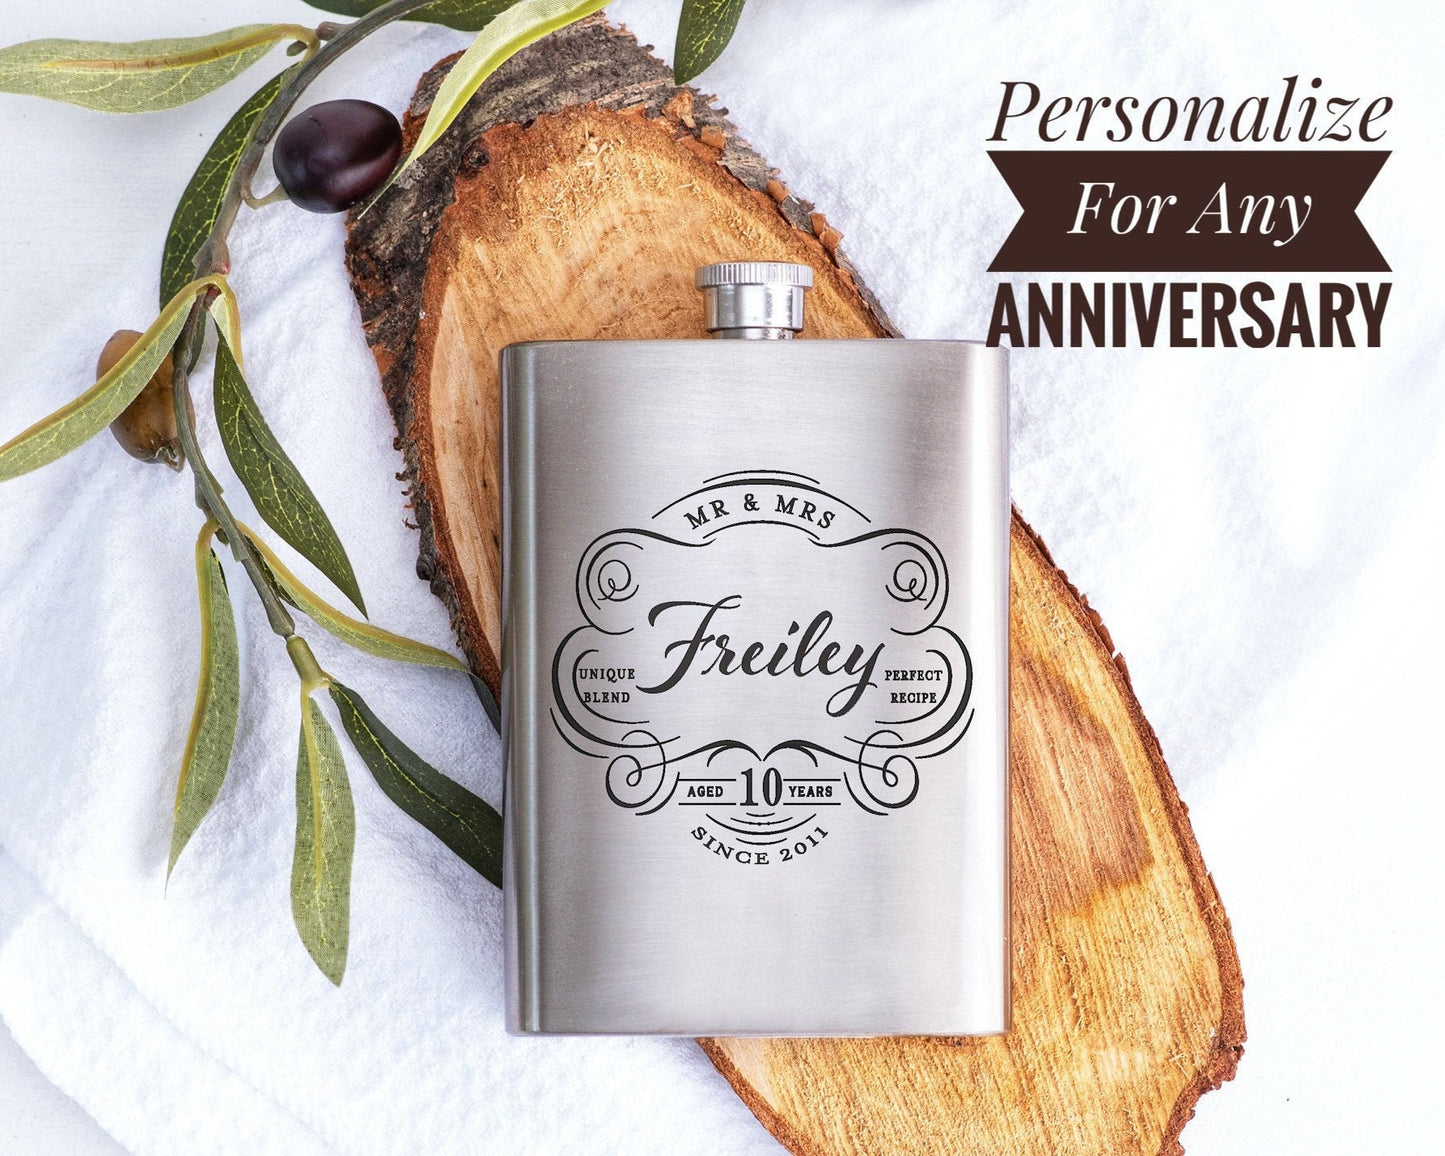 10th Anniversary Gift Personalized Stainless Steel Flask, Tin anniversary gift